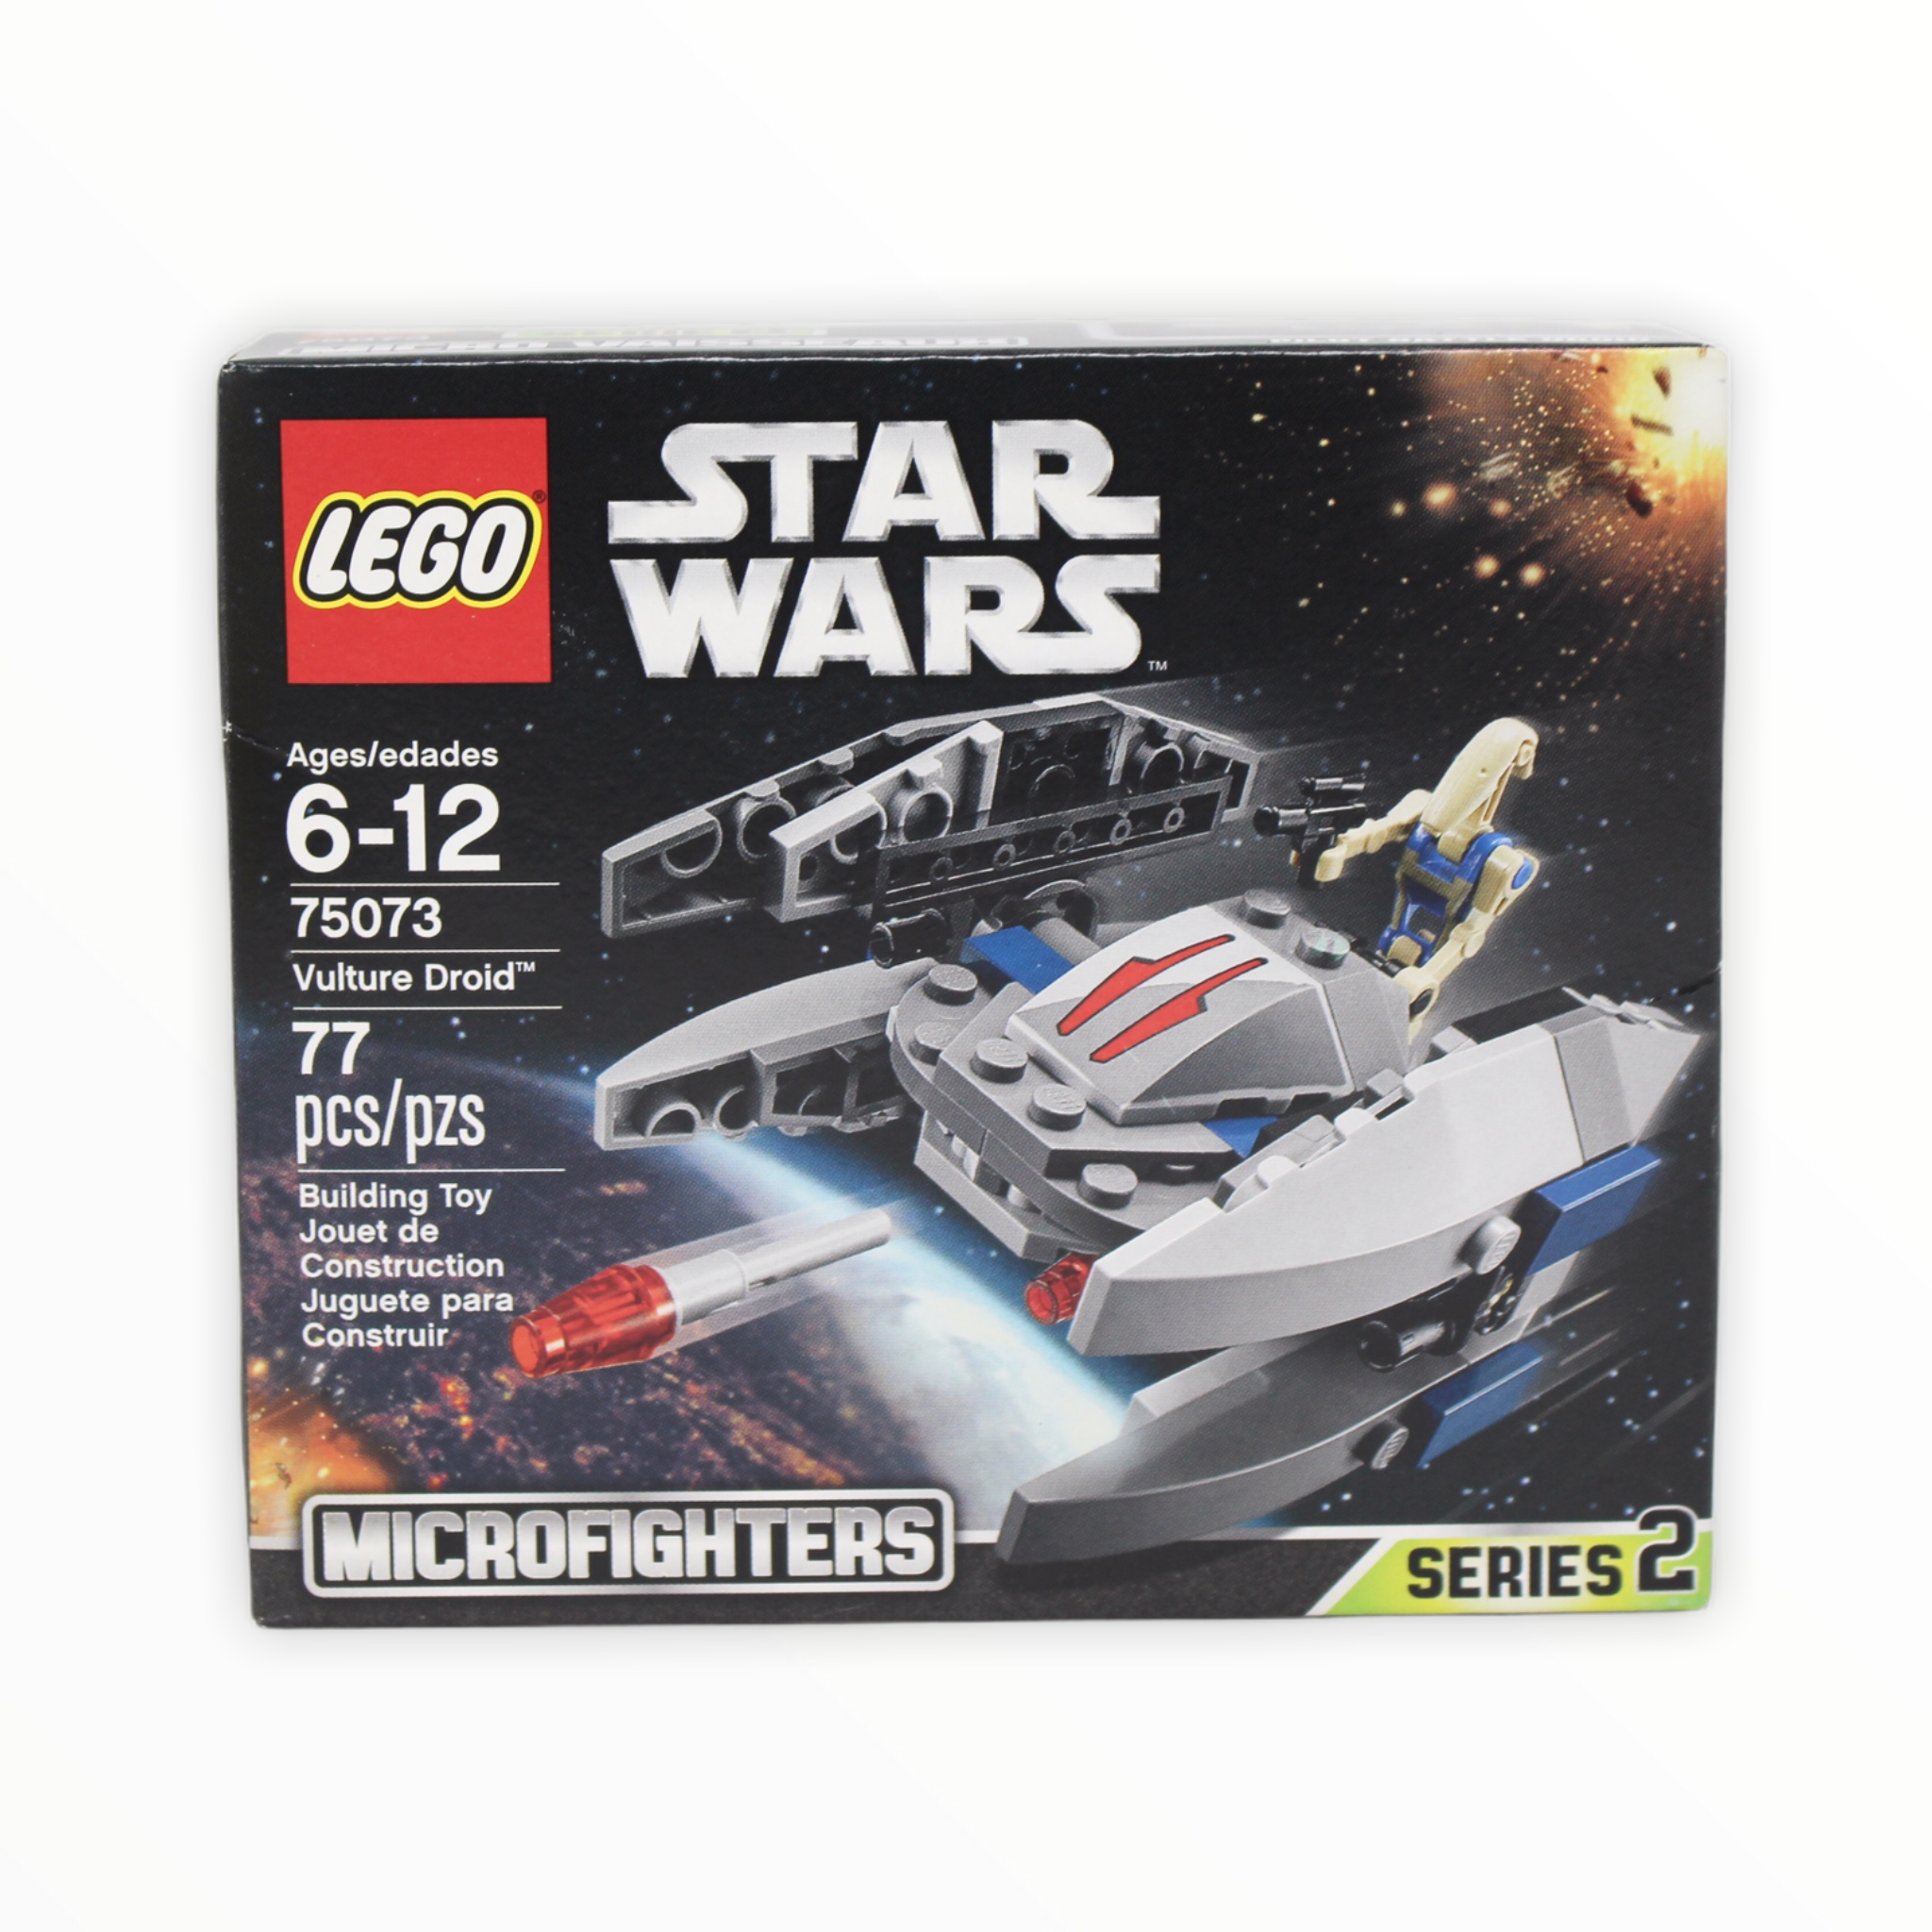 Retired Set 75073 Star Wars Vulture Droid Microfighter